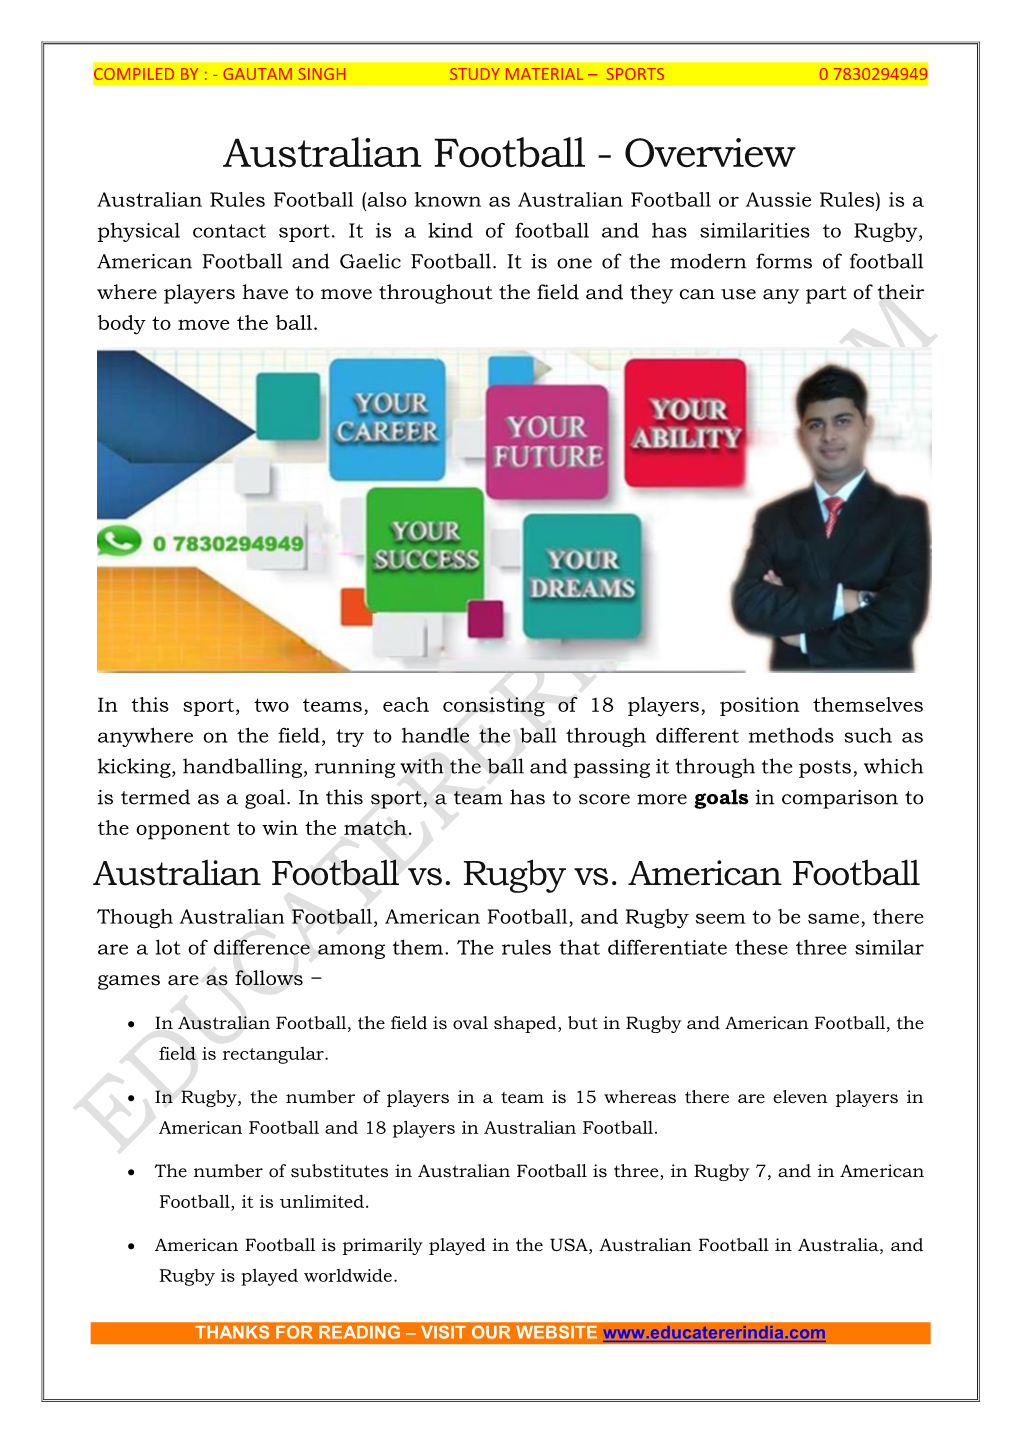 Australian Football - Overview Australian Rules Football (Also Known As Australian Football Or Aussie Rules) Is a Physical Contact Sport